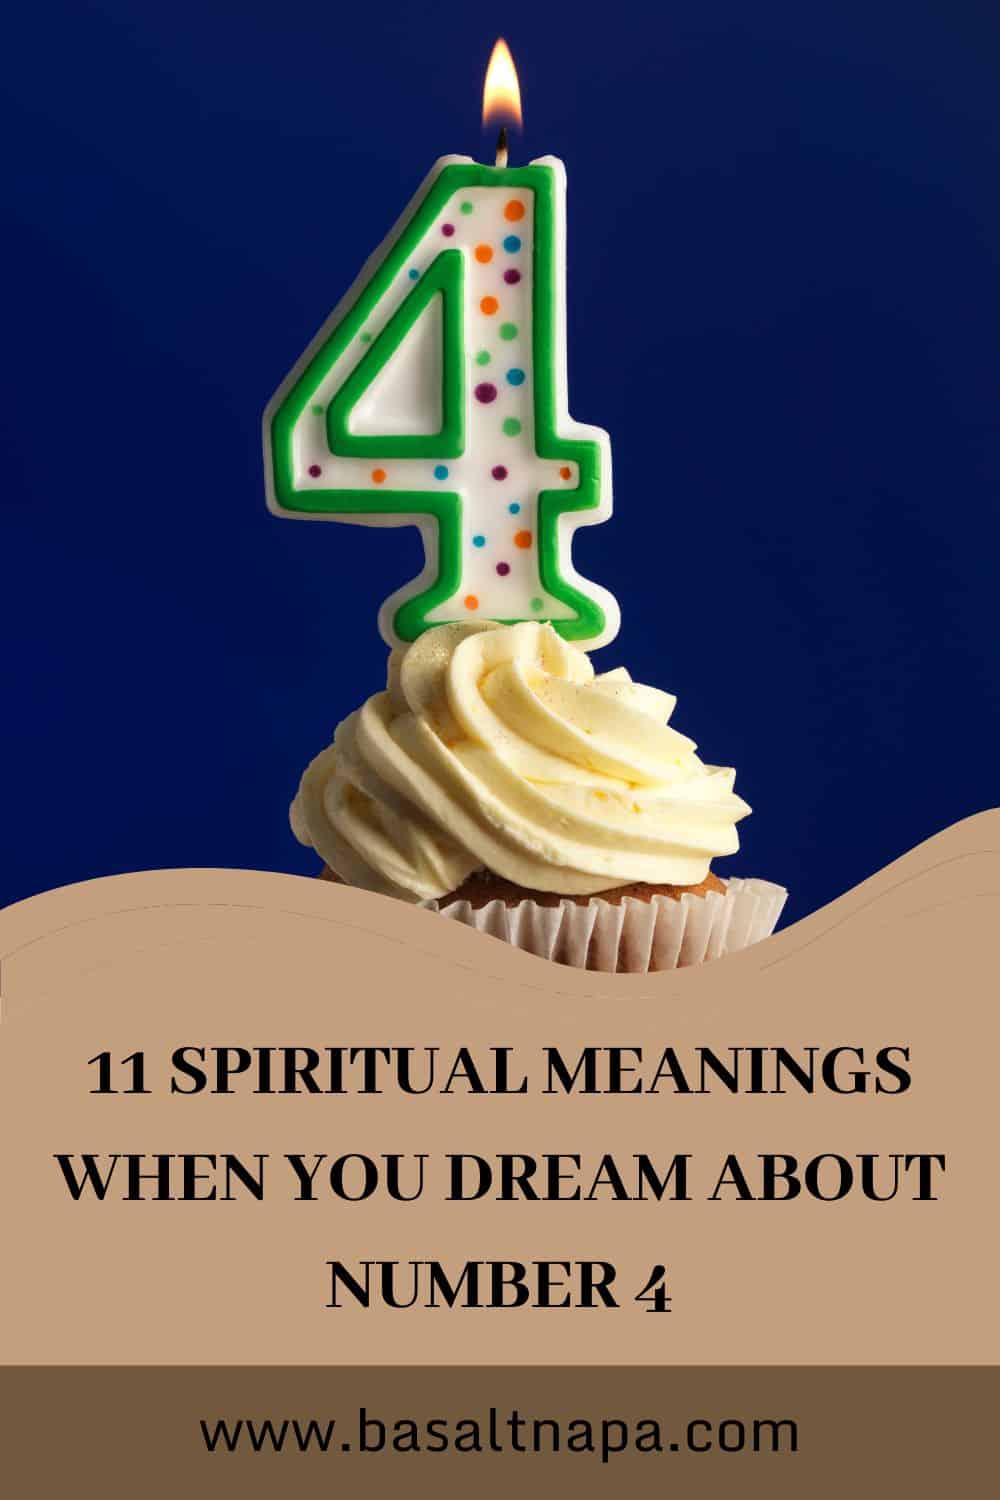 11 Spiritual Meanings When You Dream About Number 4